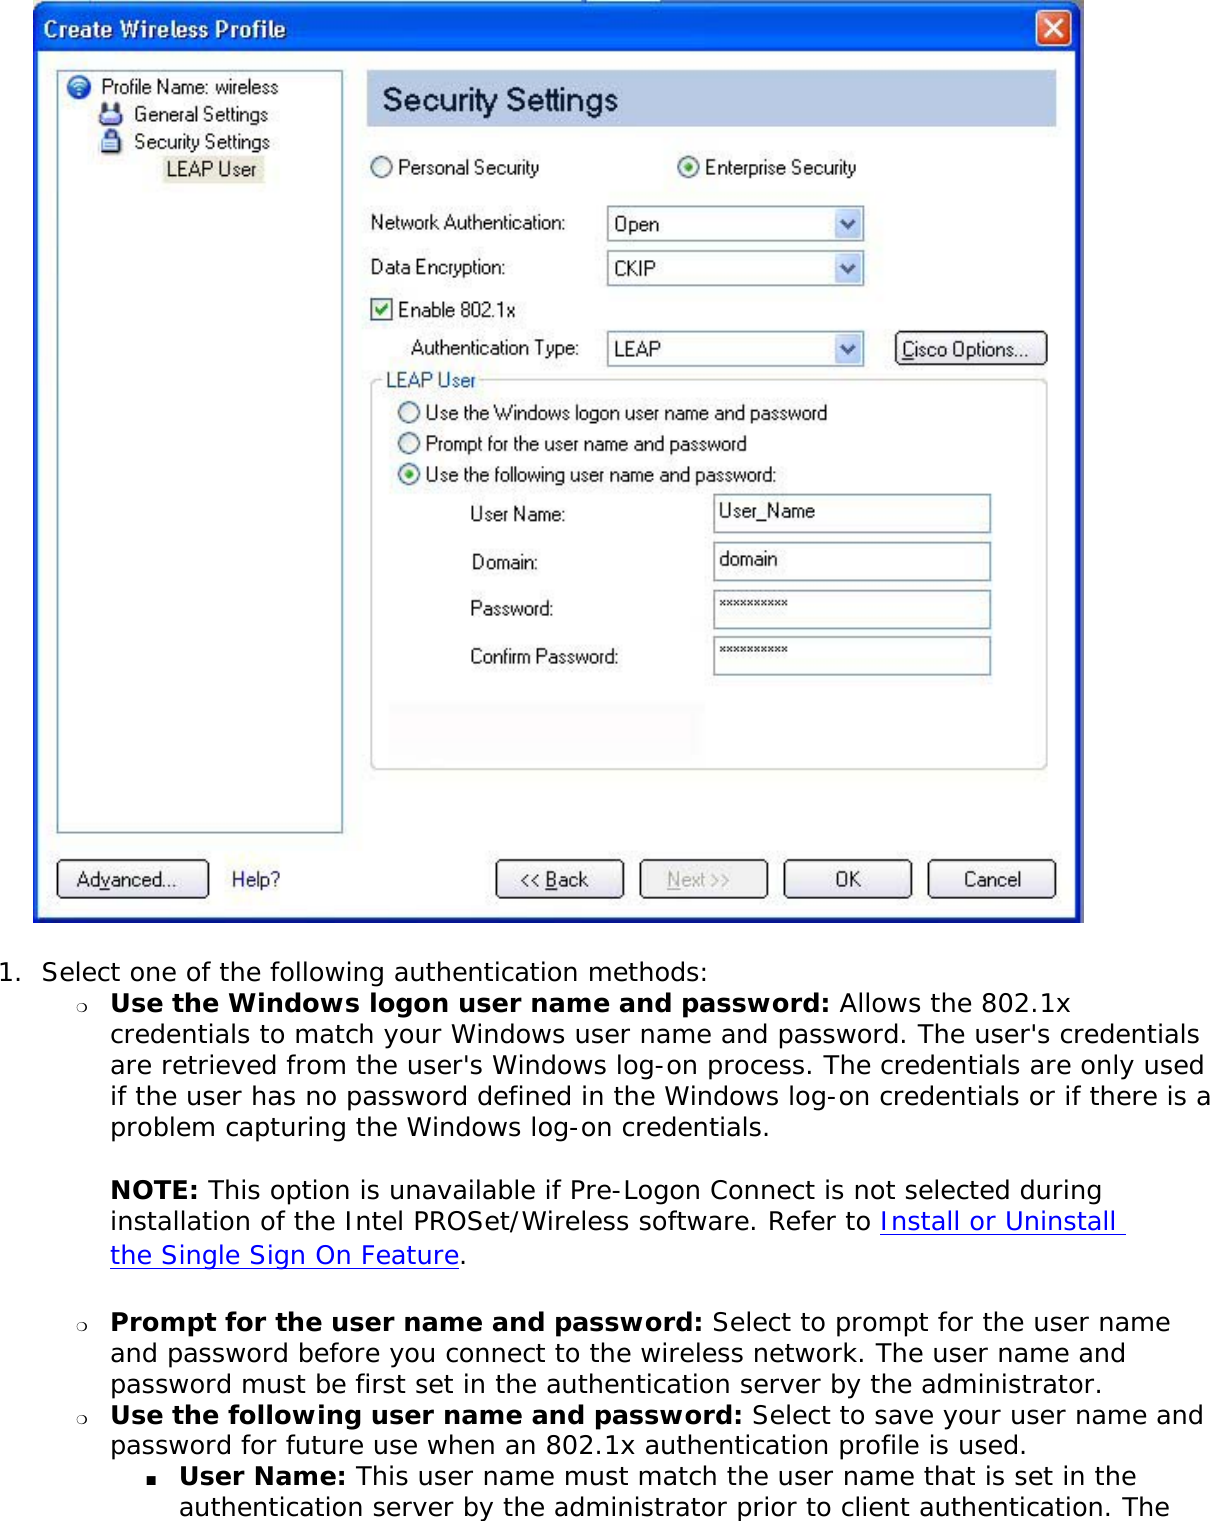  1.  Select one of the following authentication methods: ❍     Use the Windows logon user name and password: Allows the 802.1x credentials to match your Windows user name and password. The user&apos;s credentials are retrieved from the user&apos;s Windows log-on process. The credentials are only used if the user has no password defined in the Windows log-on credentials or if there is a problem capturing the Windows log-on credentials.  NOTE: This option is unavailable if Pre-Logon Connect is not selected during installation of the Intel PROSet/Wireless software. Refer to Install or Uninstall the Single Sign On Feature. ❍     Prompt for the user name and password: Select to prompt for the user name and password before you connect to the wireless network. The user name and password must be first set in the authentication server by the administrator.❍     Use the following user name and password: Select to save your user name and password for future use when an 802.1x authentication profile is used. ■     User Name: This user name must match the user name that is set in the authentication server by the administrator prior to client authentication. The 